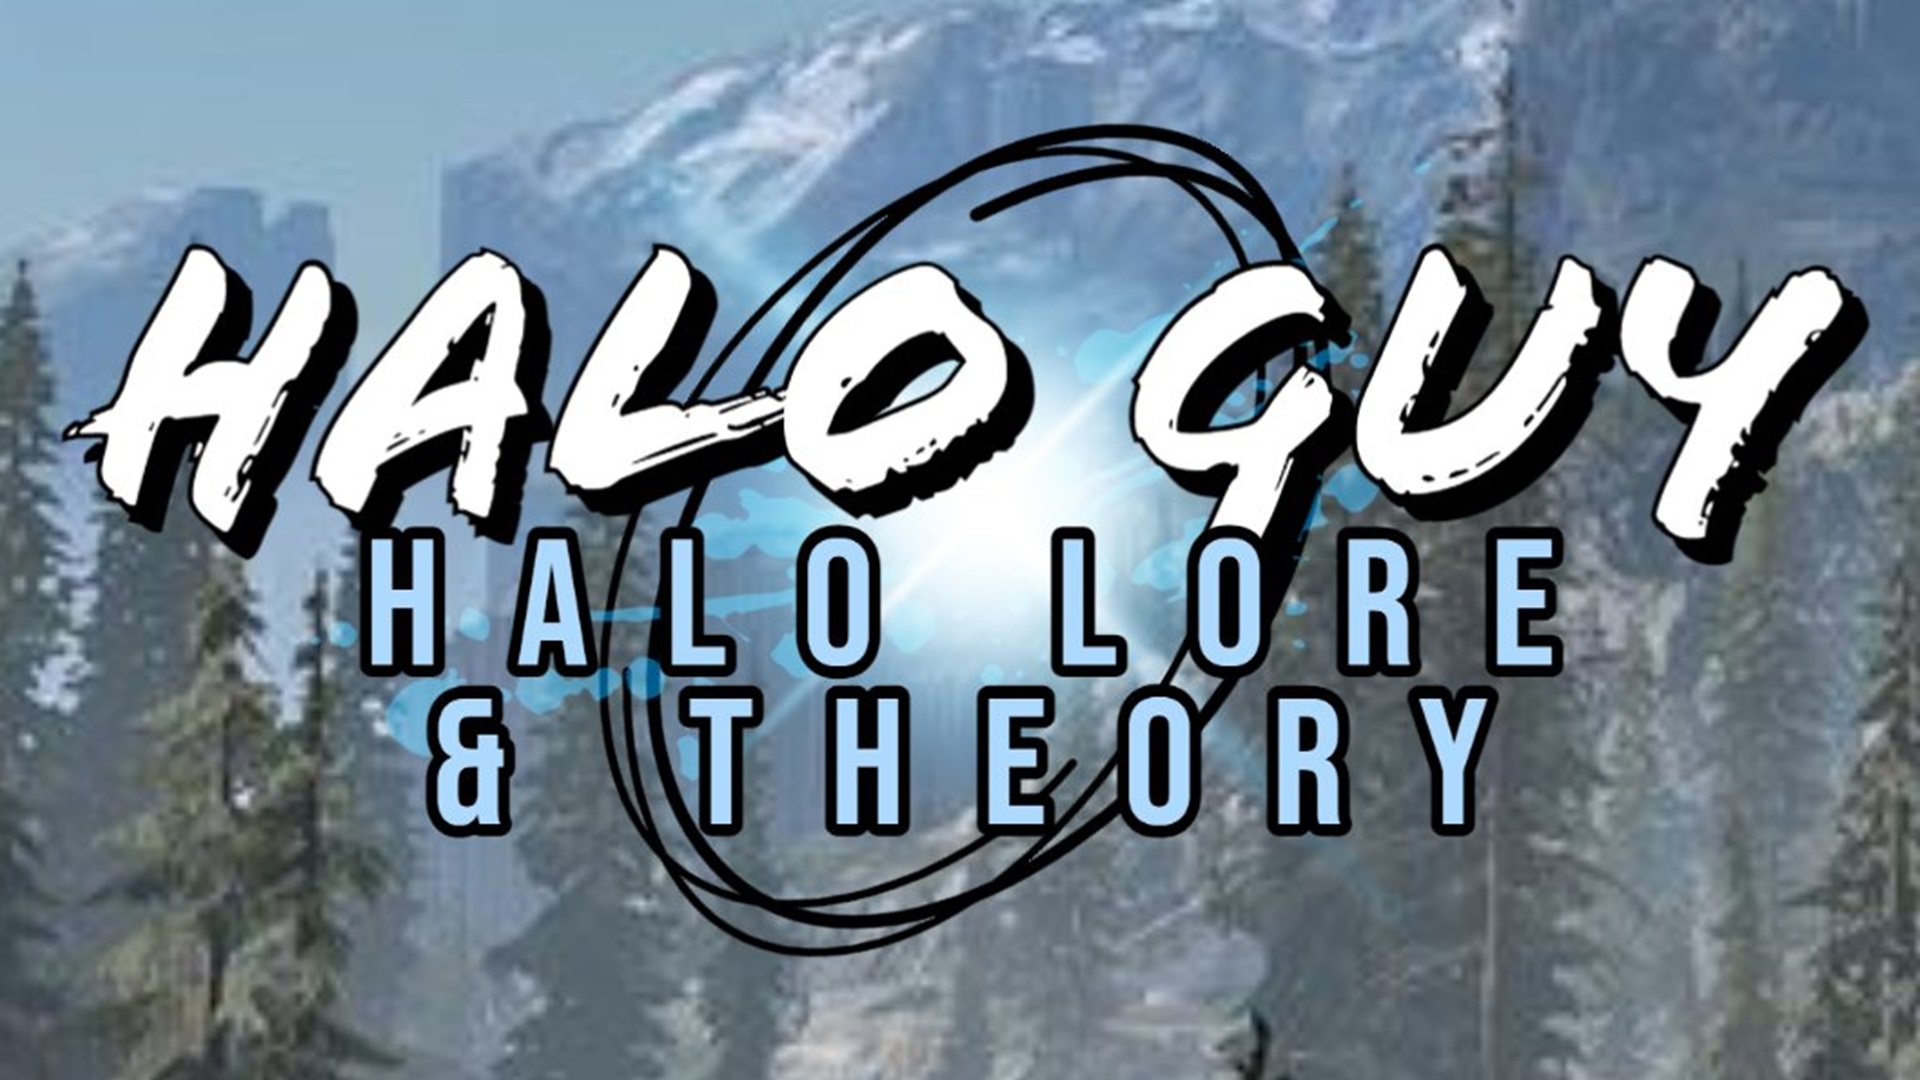 Header image for Halo Guy's YouTube channel